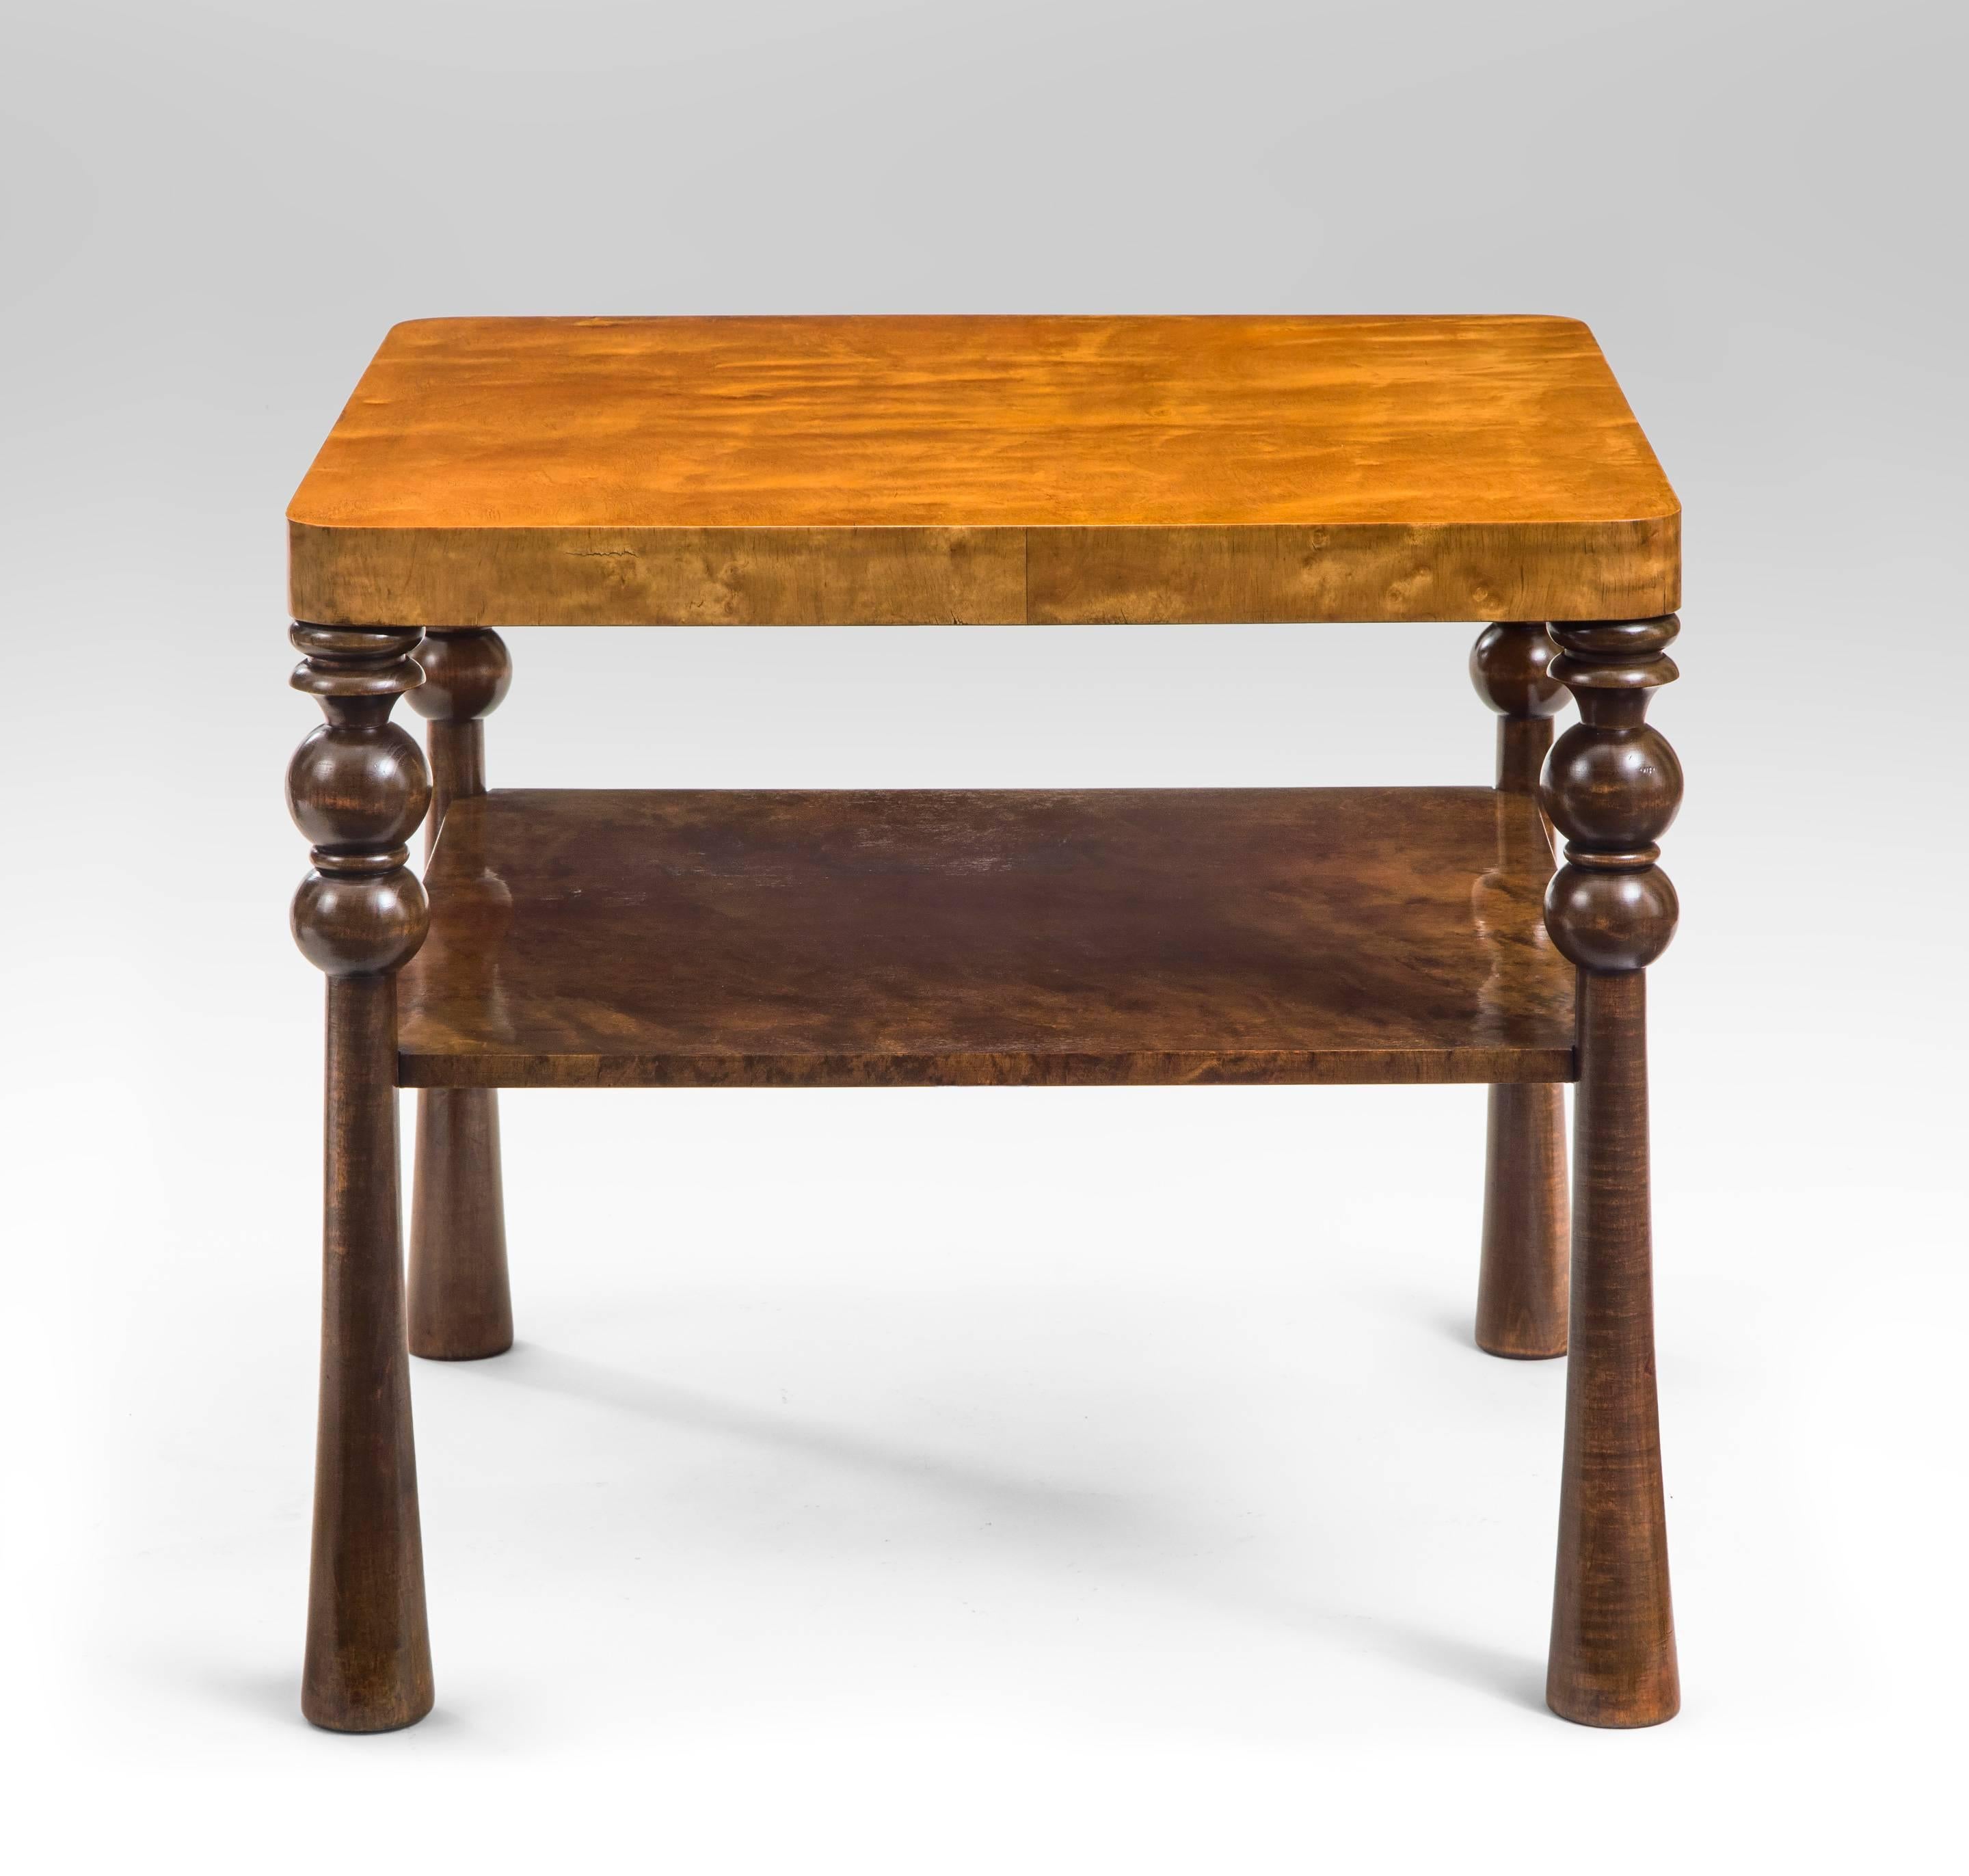 A very crisply designed table of beautiful figured birch. The square top with rounded corners, raised on four turned legs, joined by a lower shelf. 

Professionally restored, Beautifully repolished, ready to add to your collection.